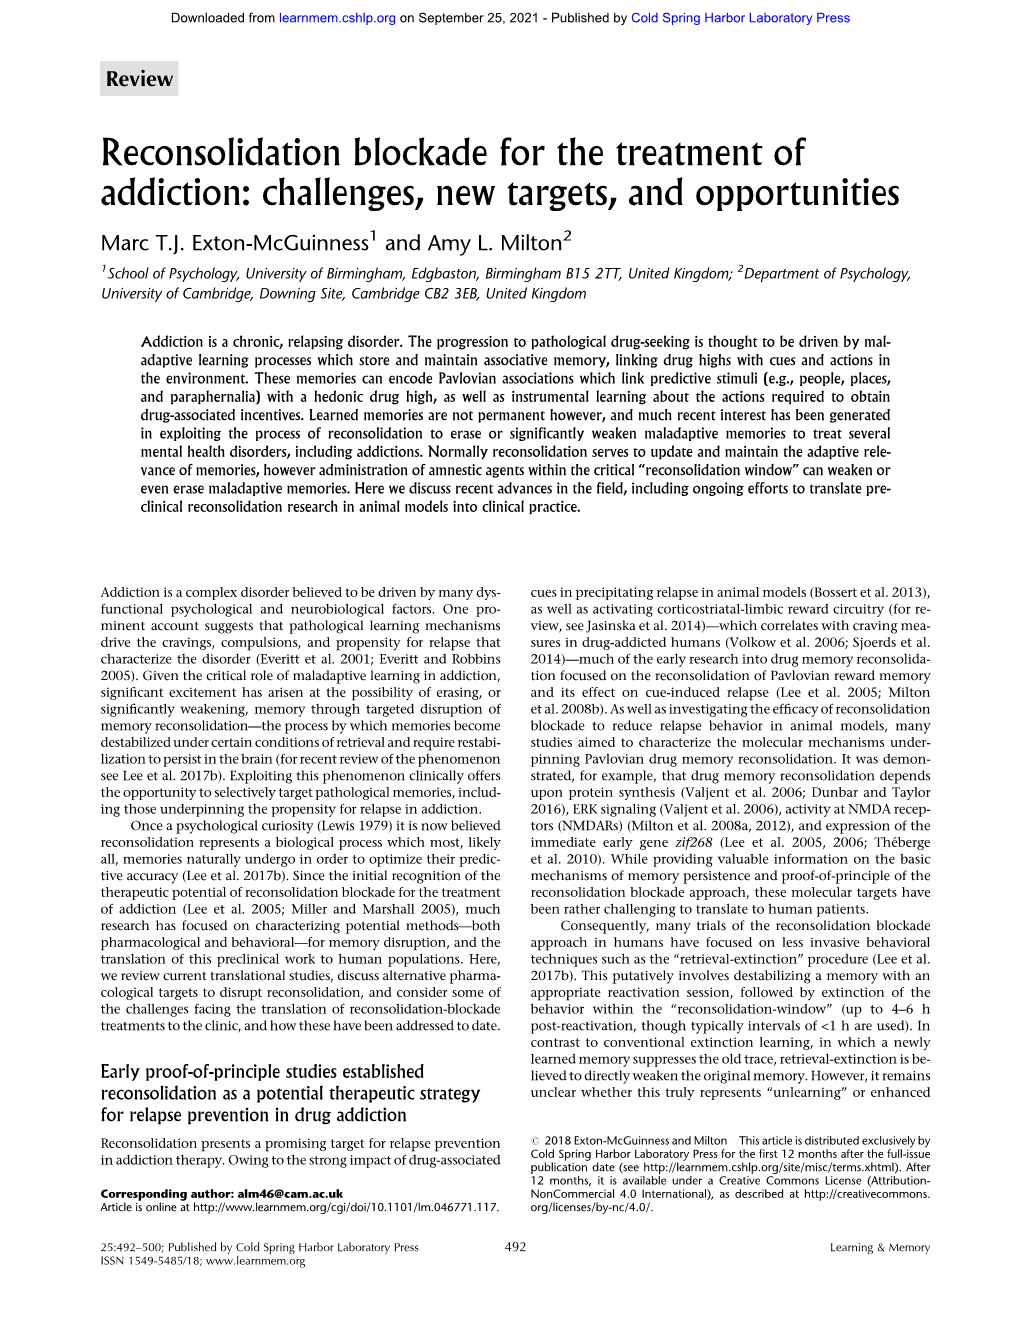 Reconsolidation Blockade for the Treatment of Addiction: Challenges, New Targets, and Opportunities